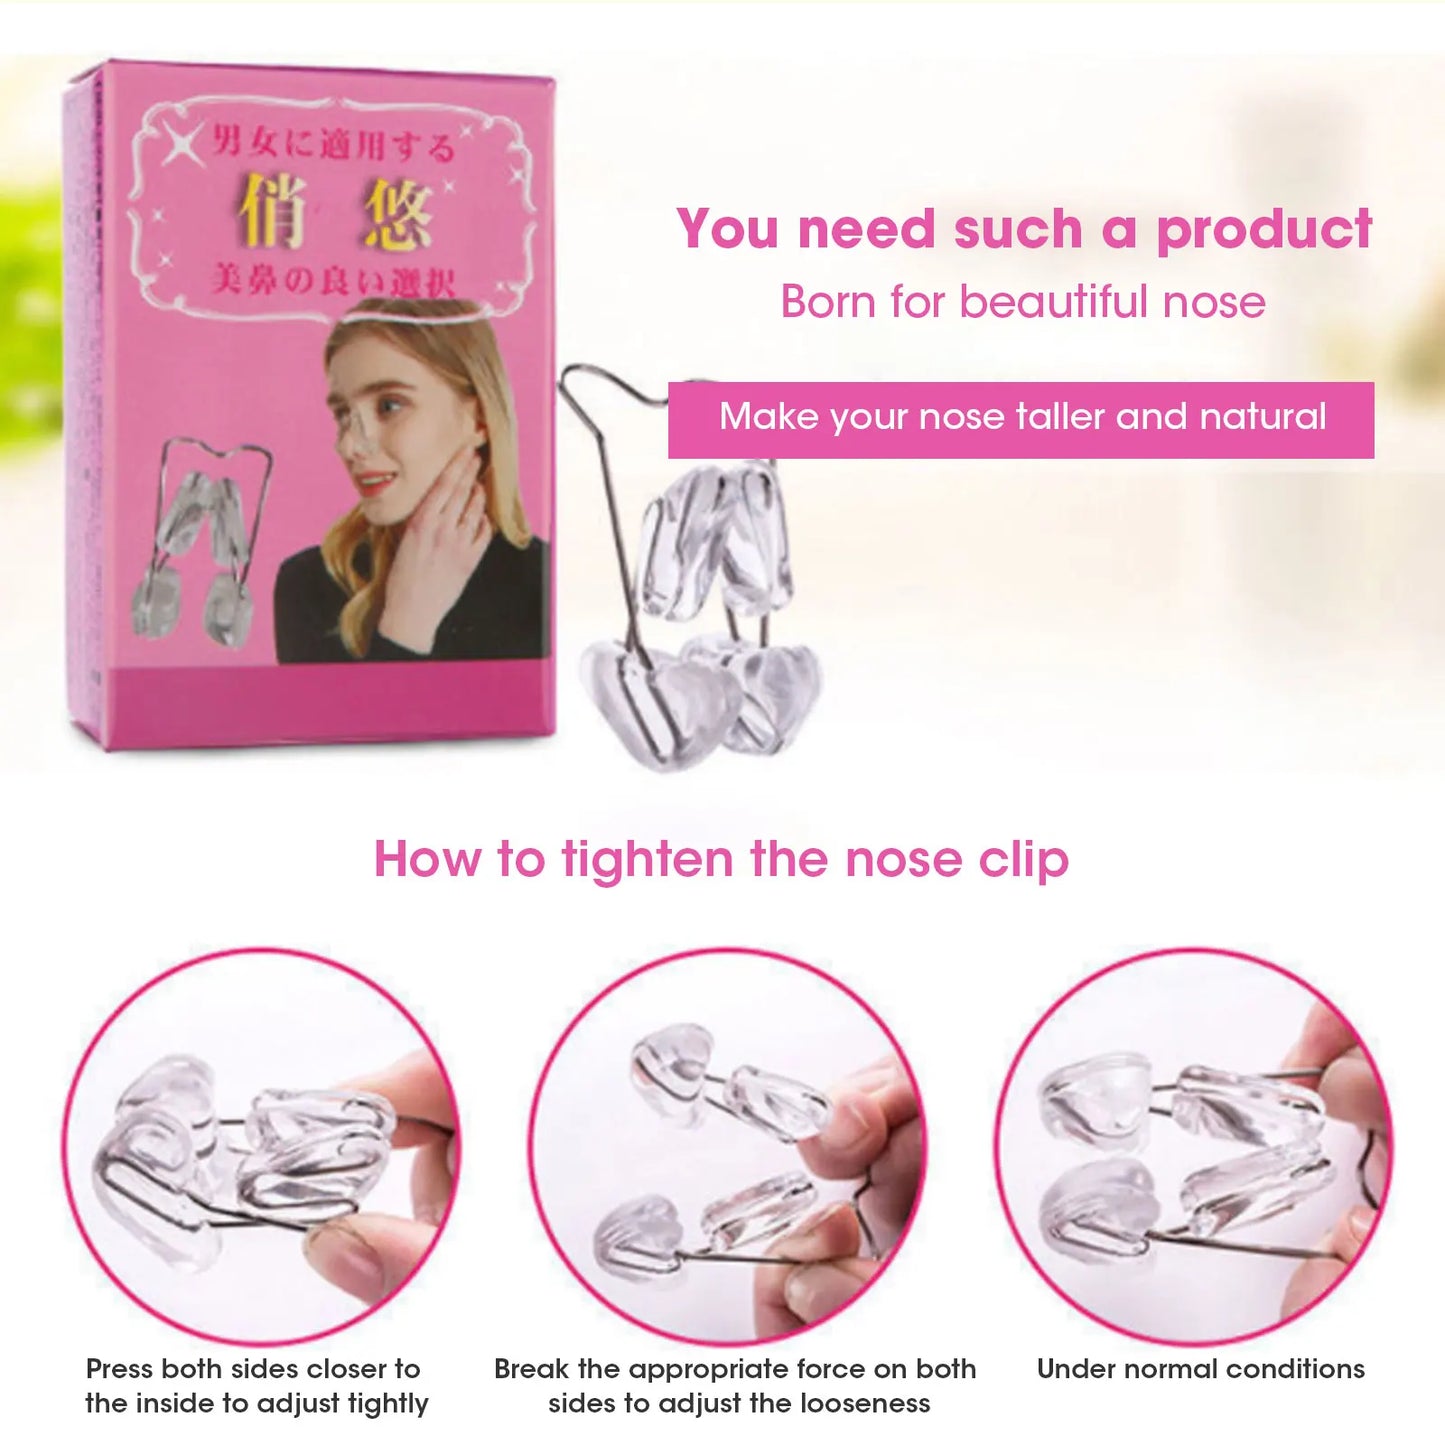 Nose Up Lifting Shaping Shaper Orthotics Clip - Beauty Nose Slimming Massager, Straightening Clips Tool, Nose Up Clip Corrector.